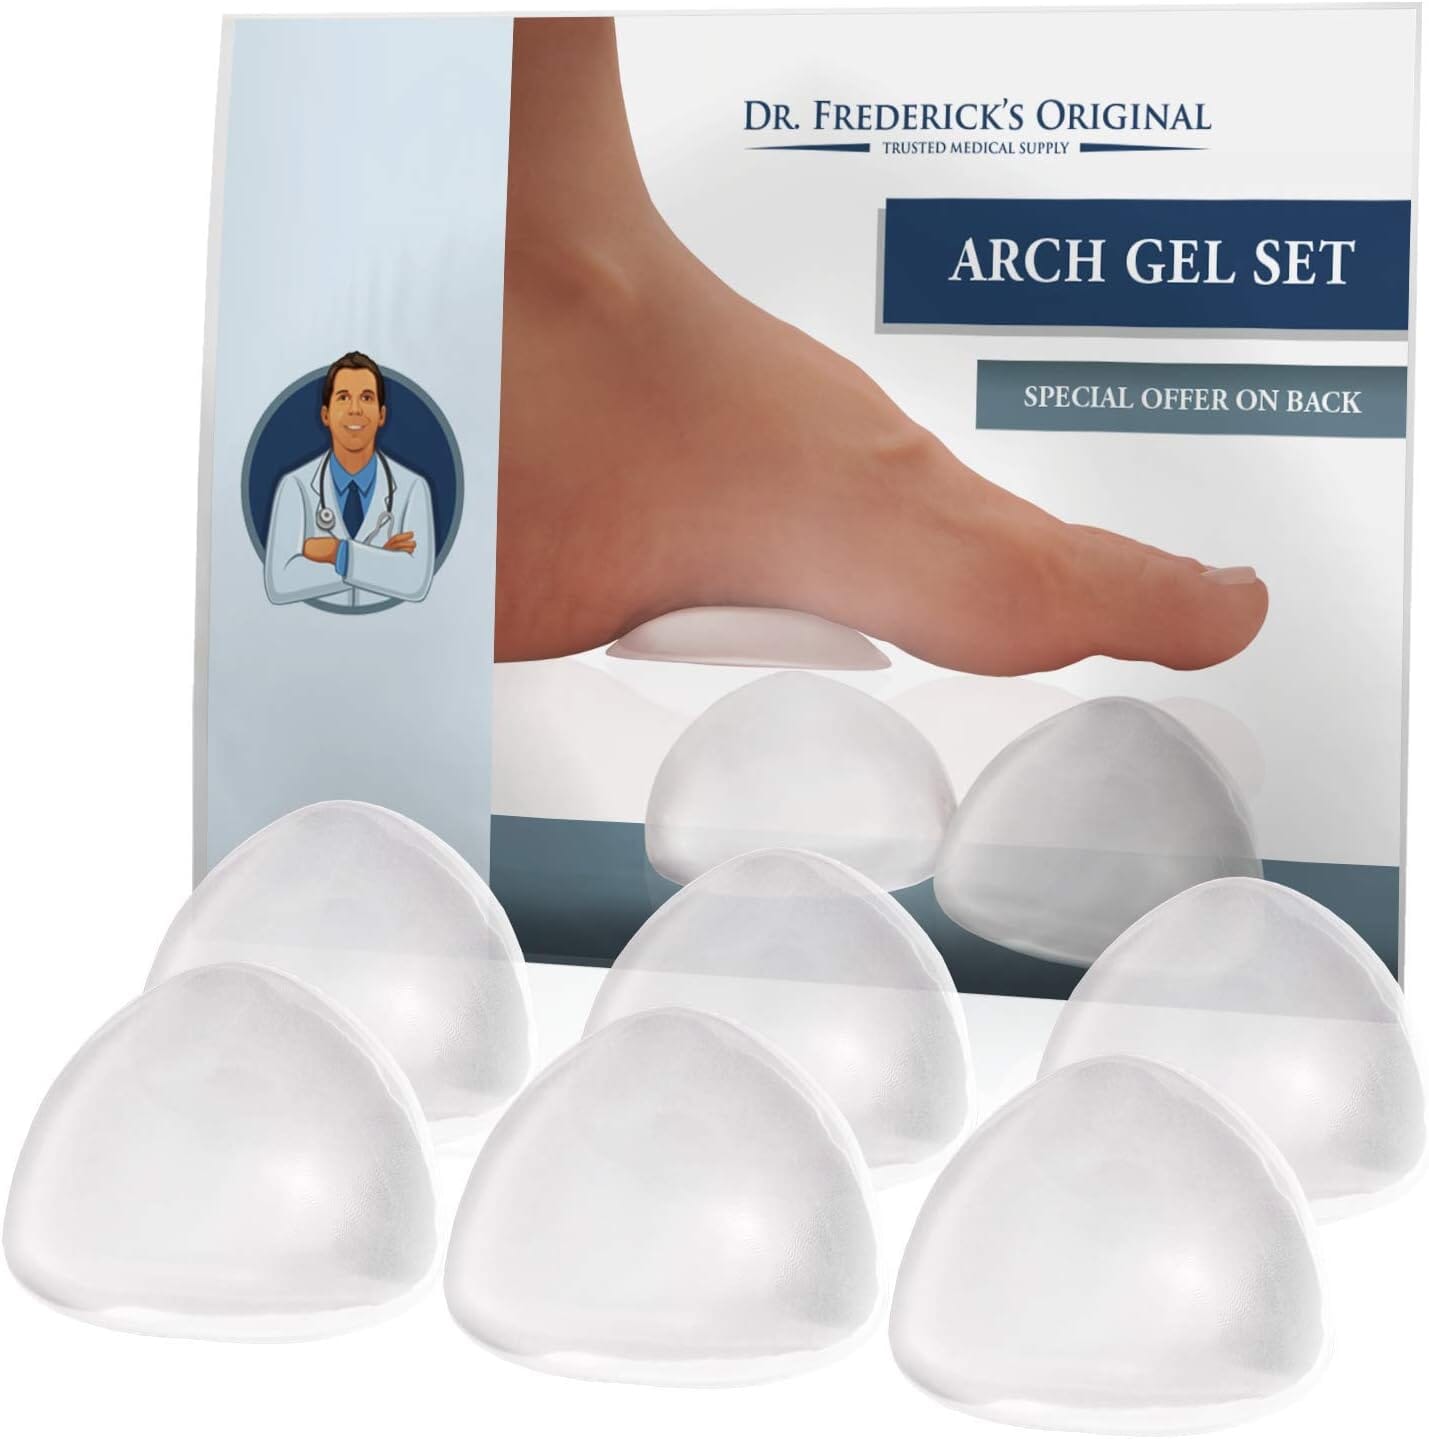 Dr. Frederick's Original Peel & Stick Foot Arch Support Gel Pads - 6 Pieces - High Arch Cushions - Relieves Pain from PES Cavus Foot Pain Dr. Frederick's Original 